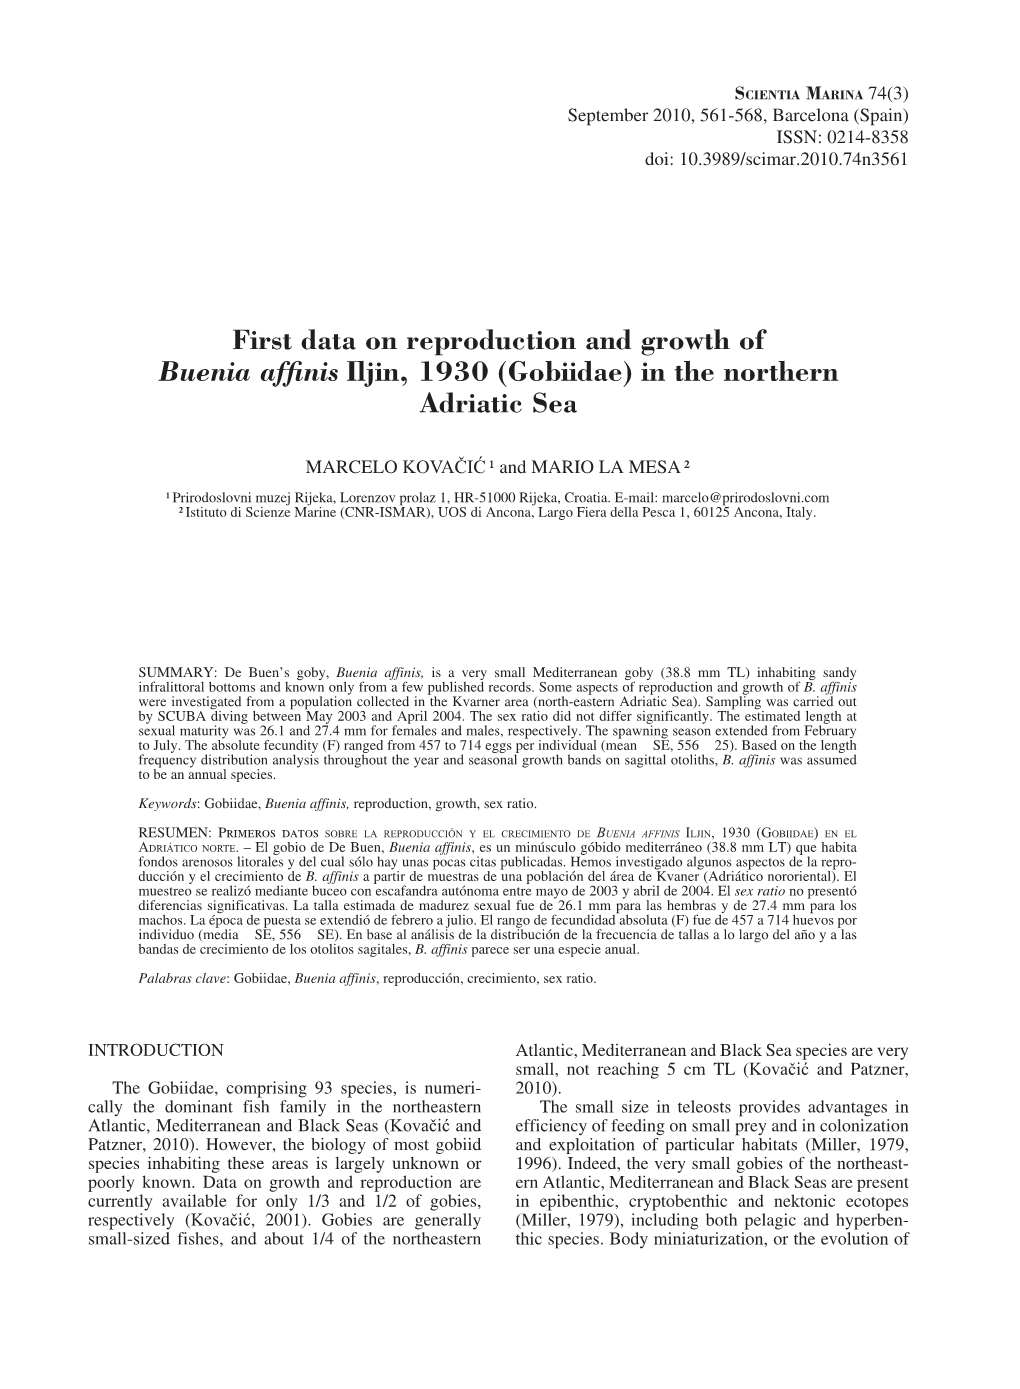 First Data on Reproduction and Growth of Buenia Affinis Iljin, 1930 (Gobiidae) in the Northern Adriatic Sea